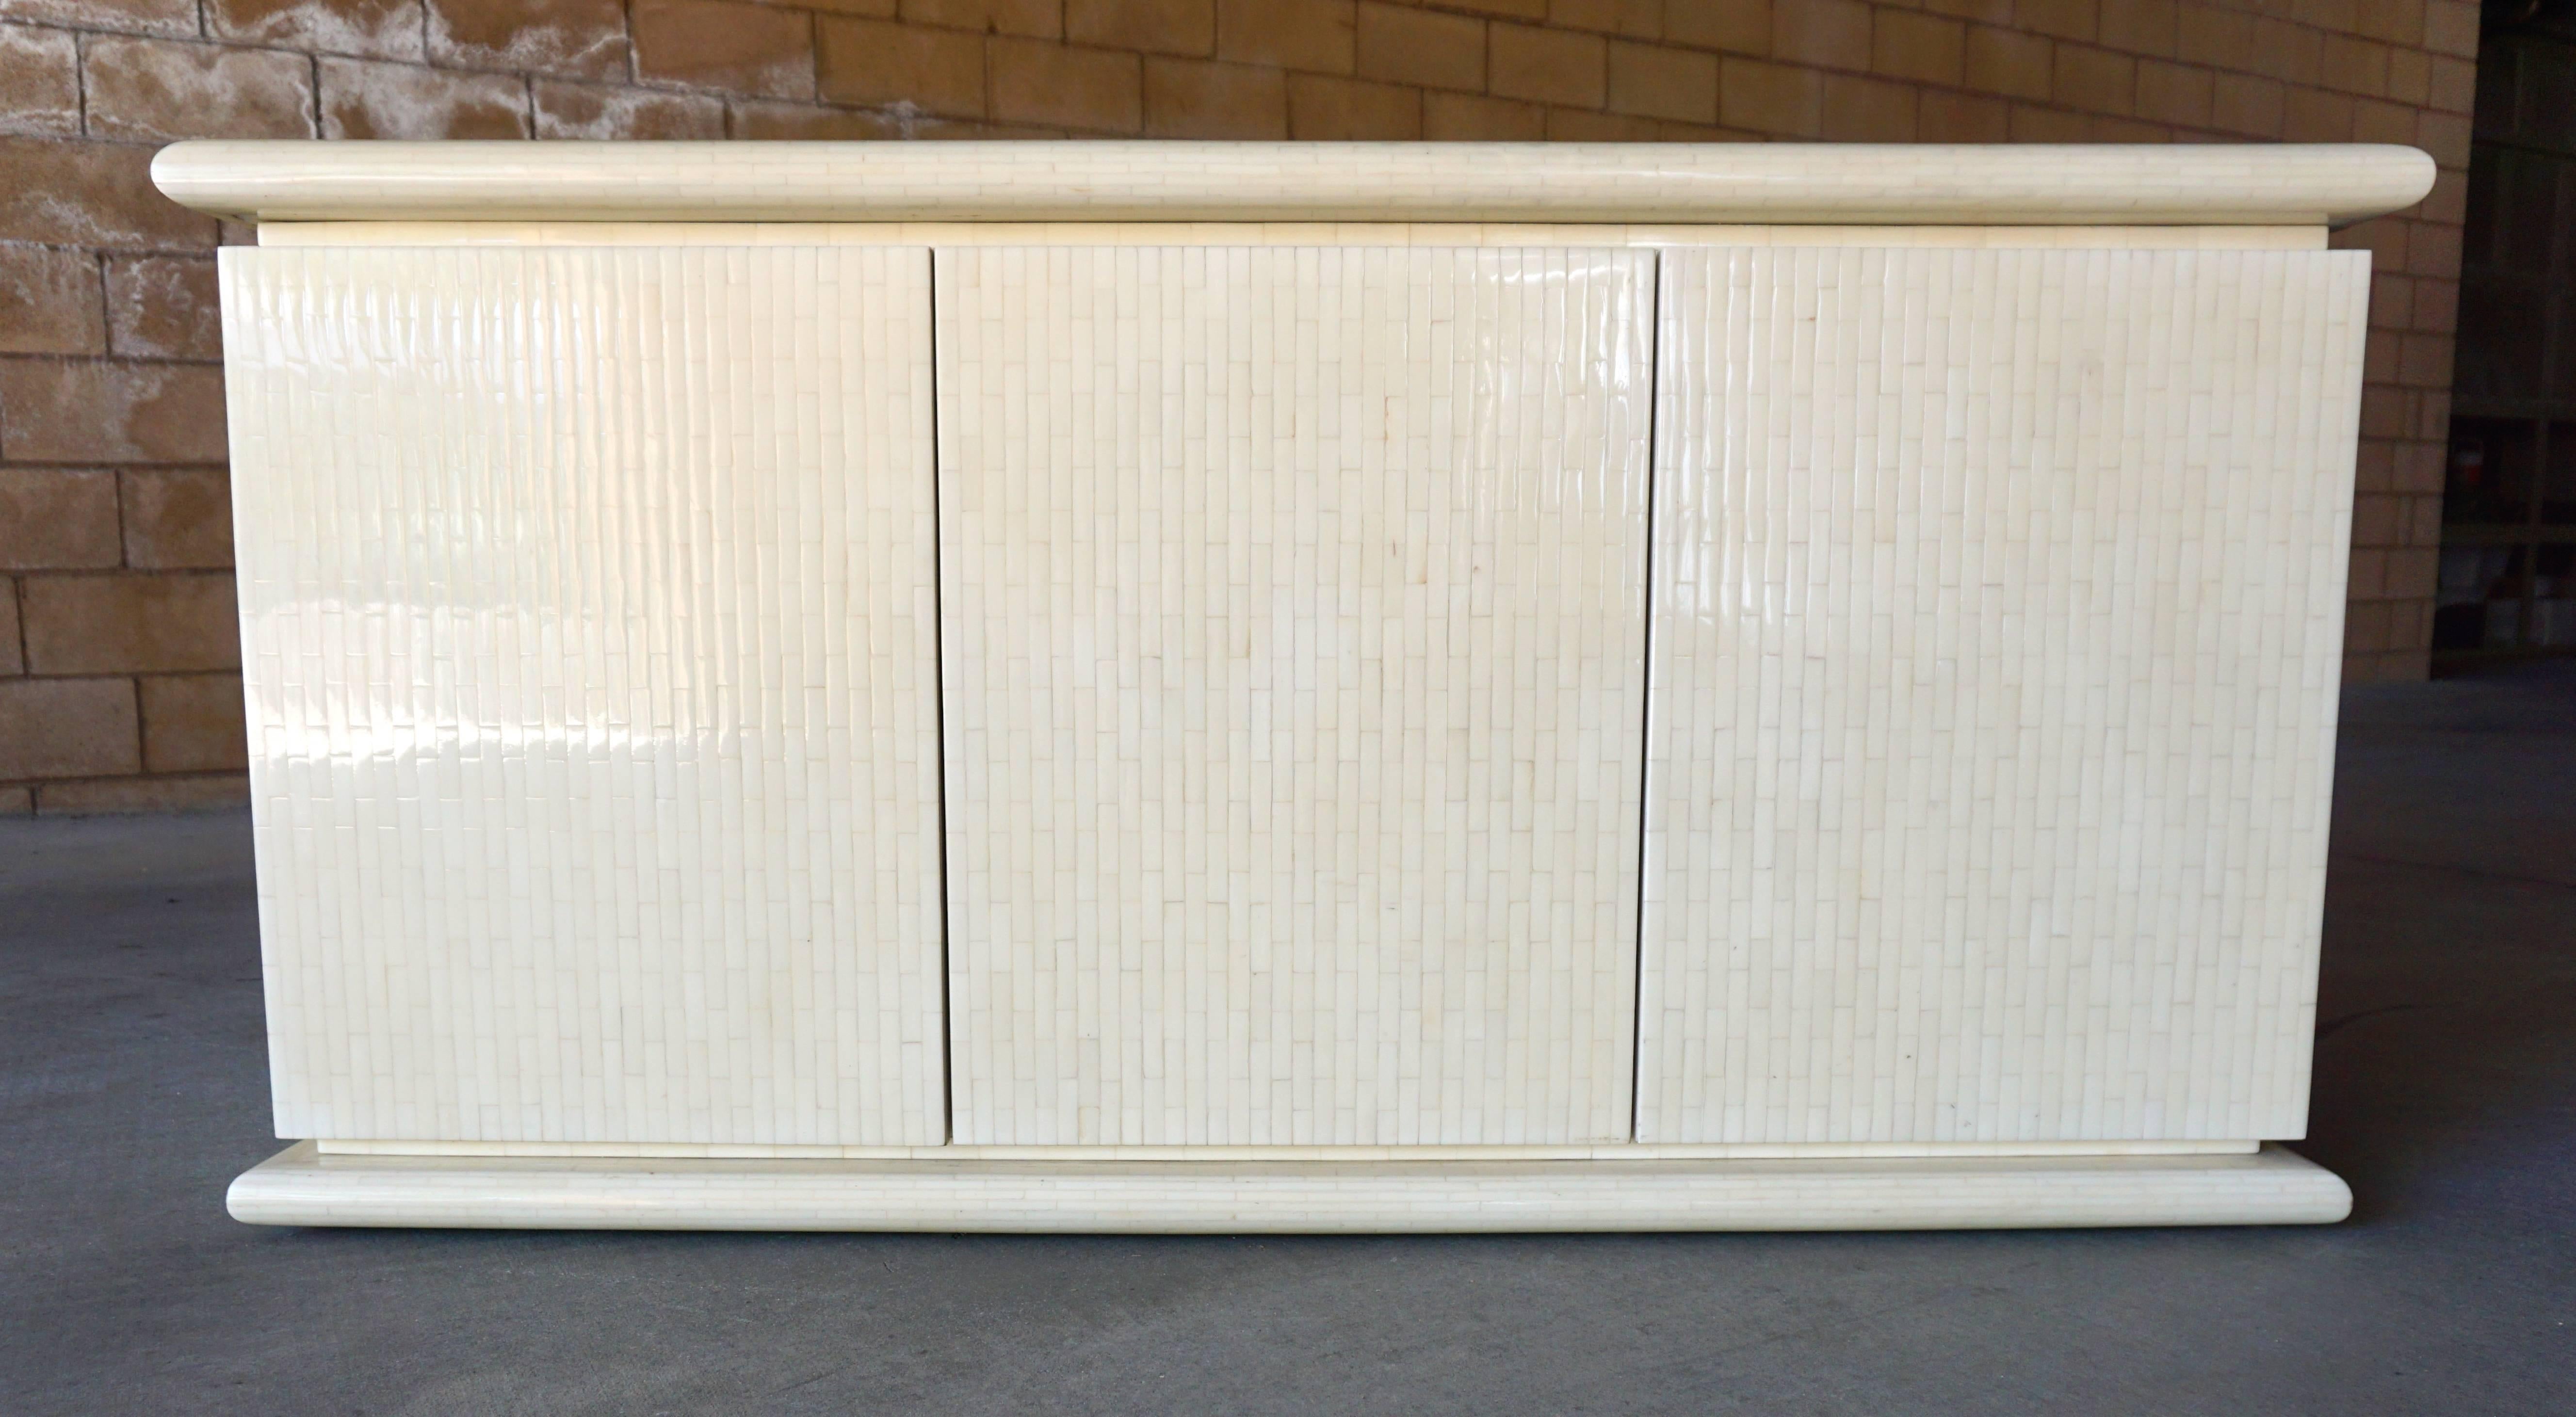 A tessellated bone three-door credenza / cabinet from the 1970s, attributed to Columbian designer and manufacturer Enrique Garcel. One of the three sections houses a set of 4 drawers with the others having adjustable shelving. The chic styling and